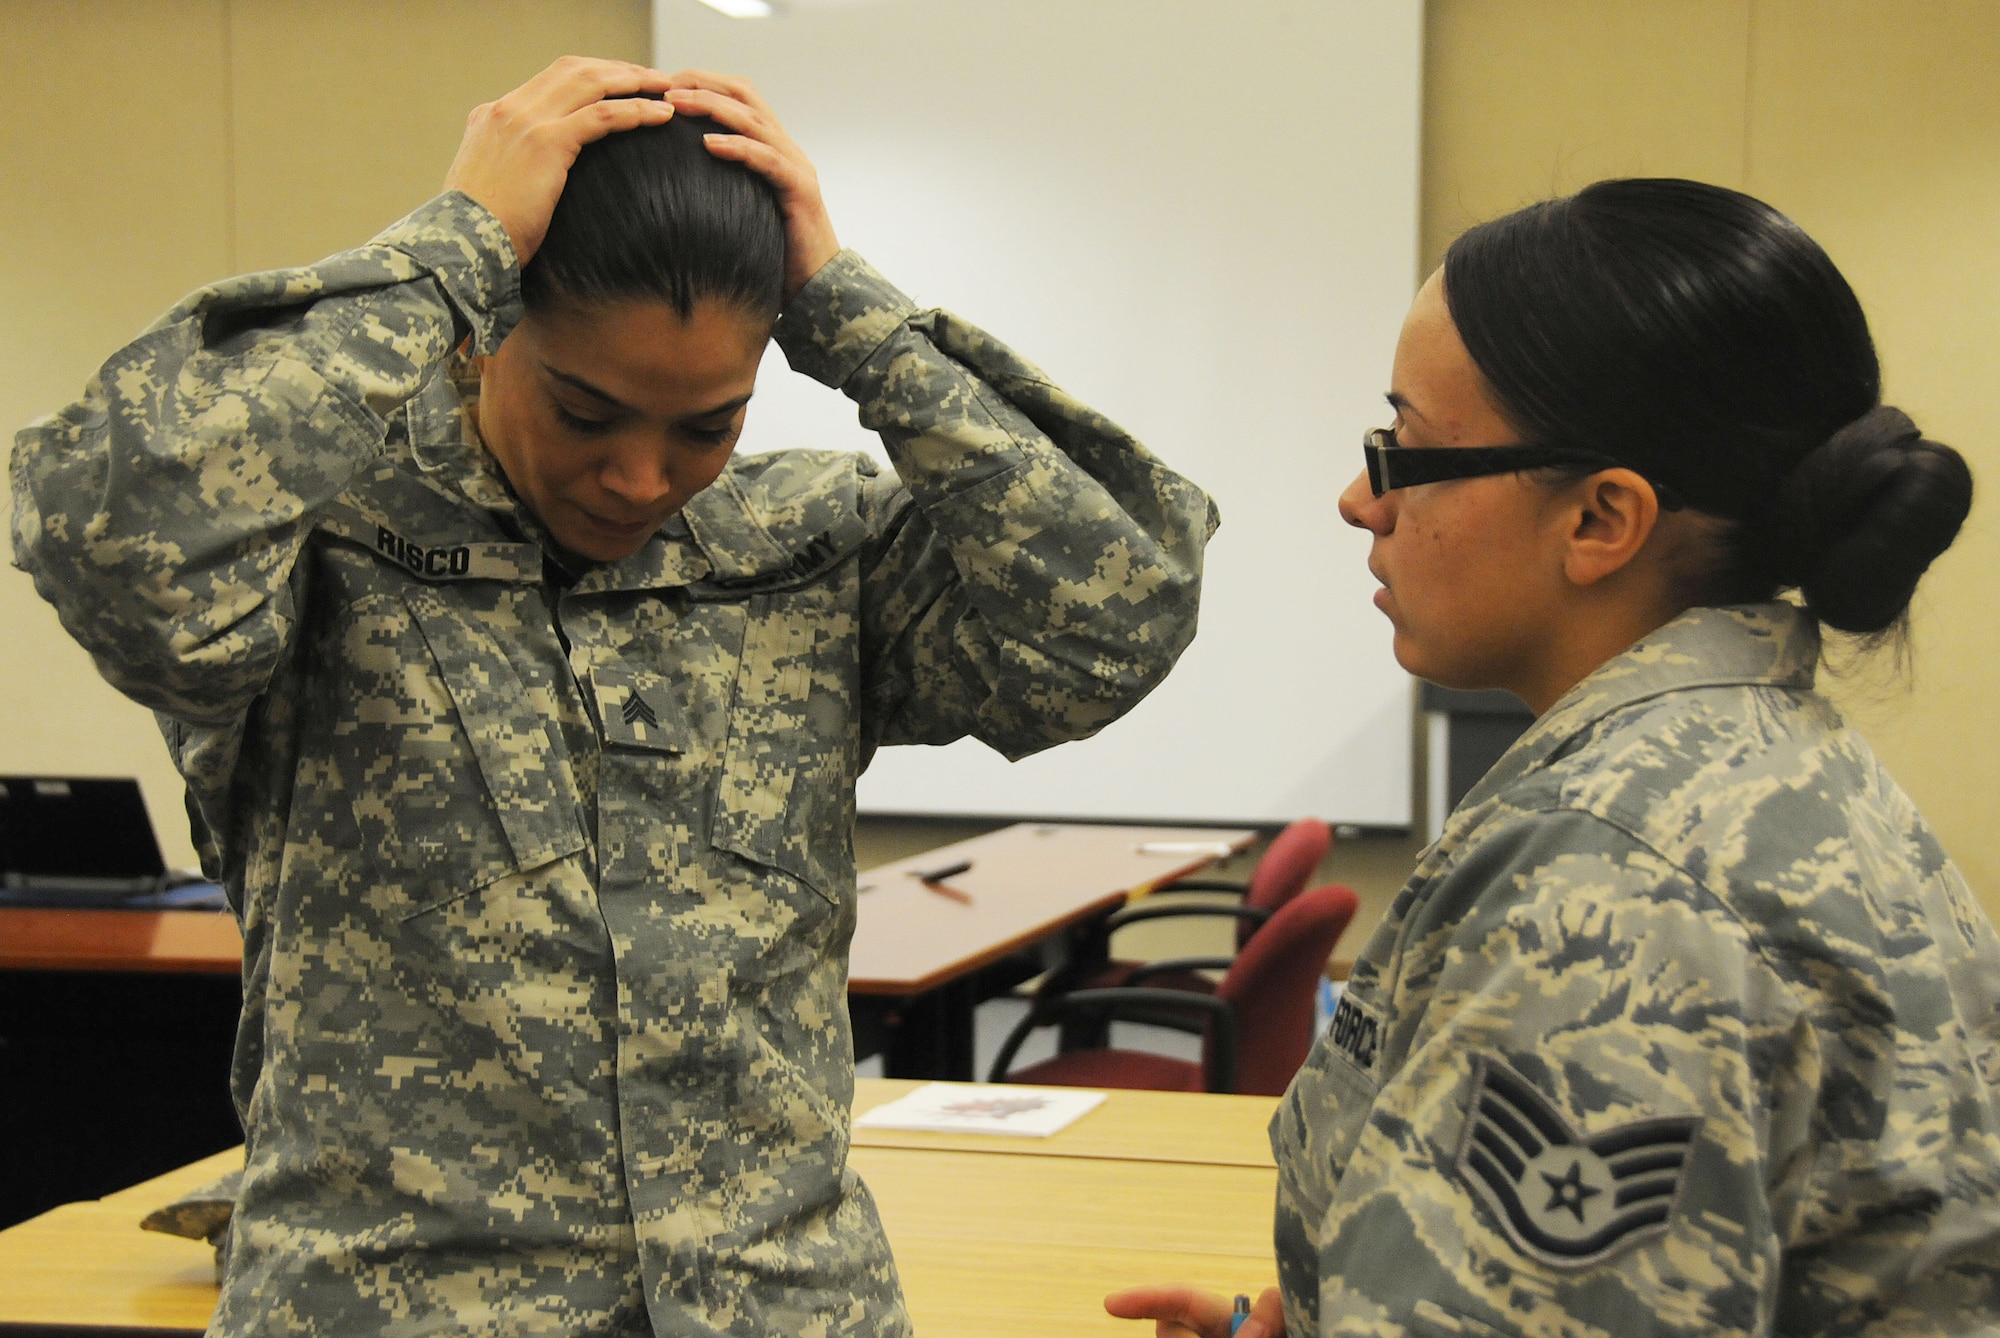 Air Force Staff Sgt. Jennifer Robledo, a future chaplain assistant from the 108th Wing, helps Army Sgt. Xochi Risco, a chaplain assistant from the 42nd Regional Support Group, with her simulated distress during the Traumatic Event Management course Jan. 16, 2015, at Joint Base McGuire-Dix-Lakehurst, N.J. The scenario discussion involved role playing and took place after a fictitious plane crash. Risco played a personwho was heavily effective by the crisis, and walked away from the discussion. Robledo was a facilitator for the scenario and followed right after Risco to console her. The Army's TEM course is a week long and focuses on unit cohesion and effectiveness to help manage crisis situations. The course focuses on group activities and role playing to reinforce the lessons. At the end of the week, the students are able to take what they learned and bring it back to their units. (U.S. Air National Guard Photo by Airman 1st Class Julia Pyun/Released)